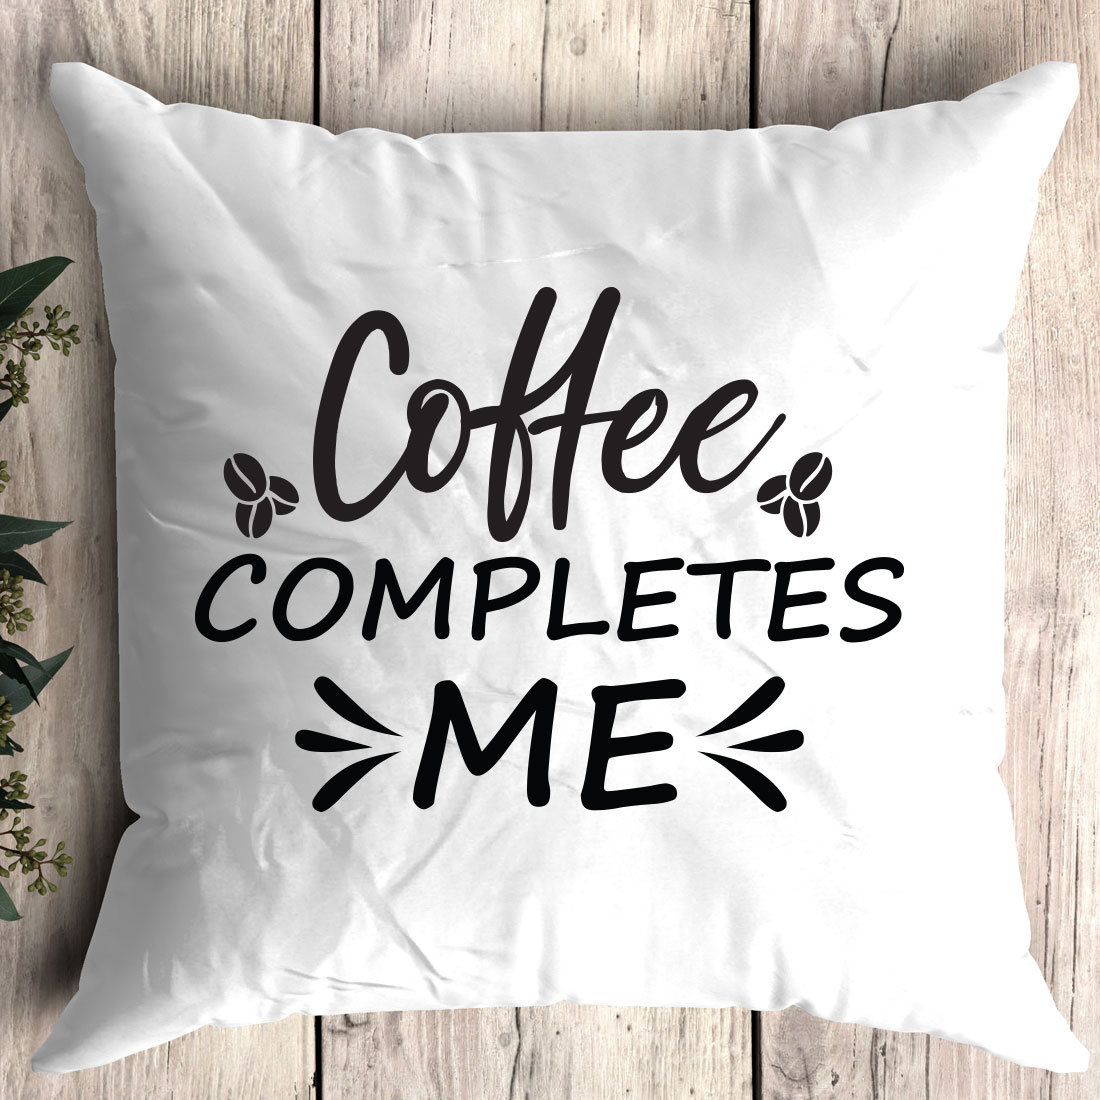 White pillow with the words coffee completes me on it.